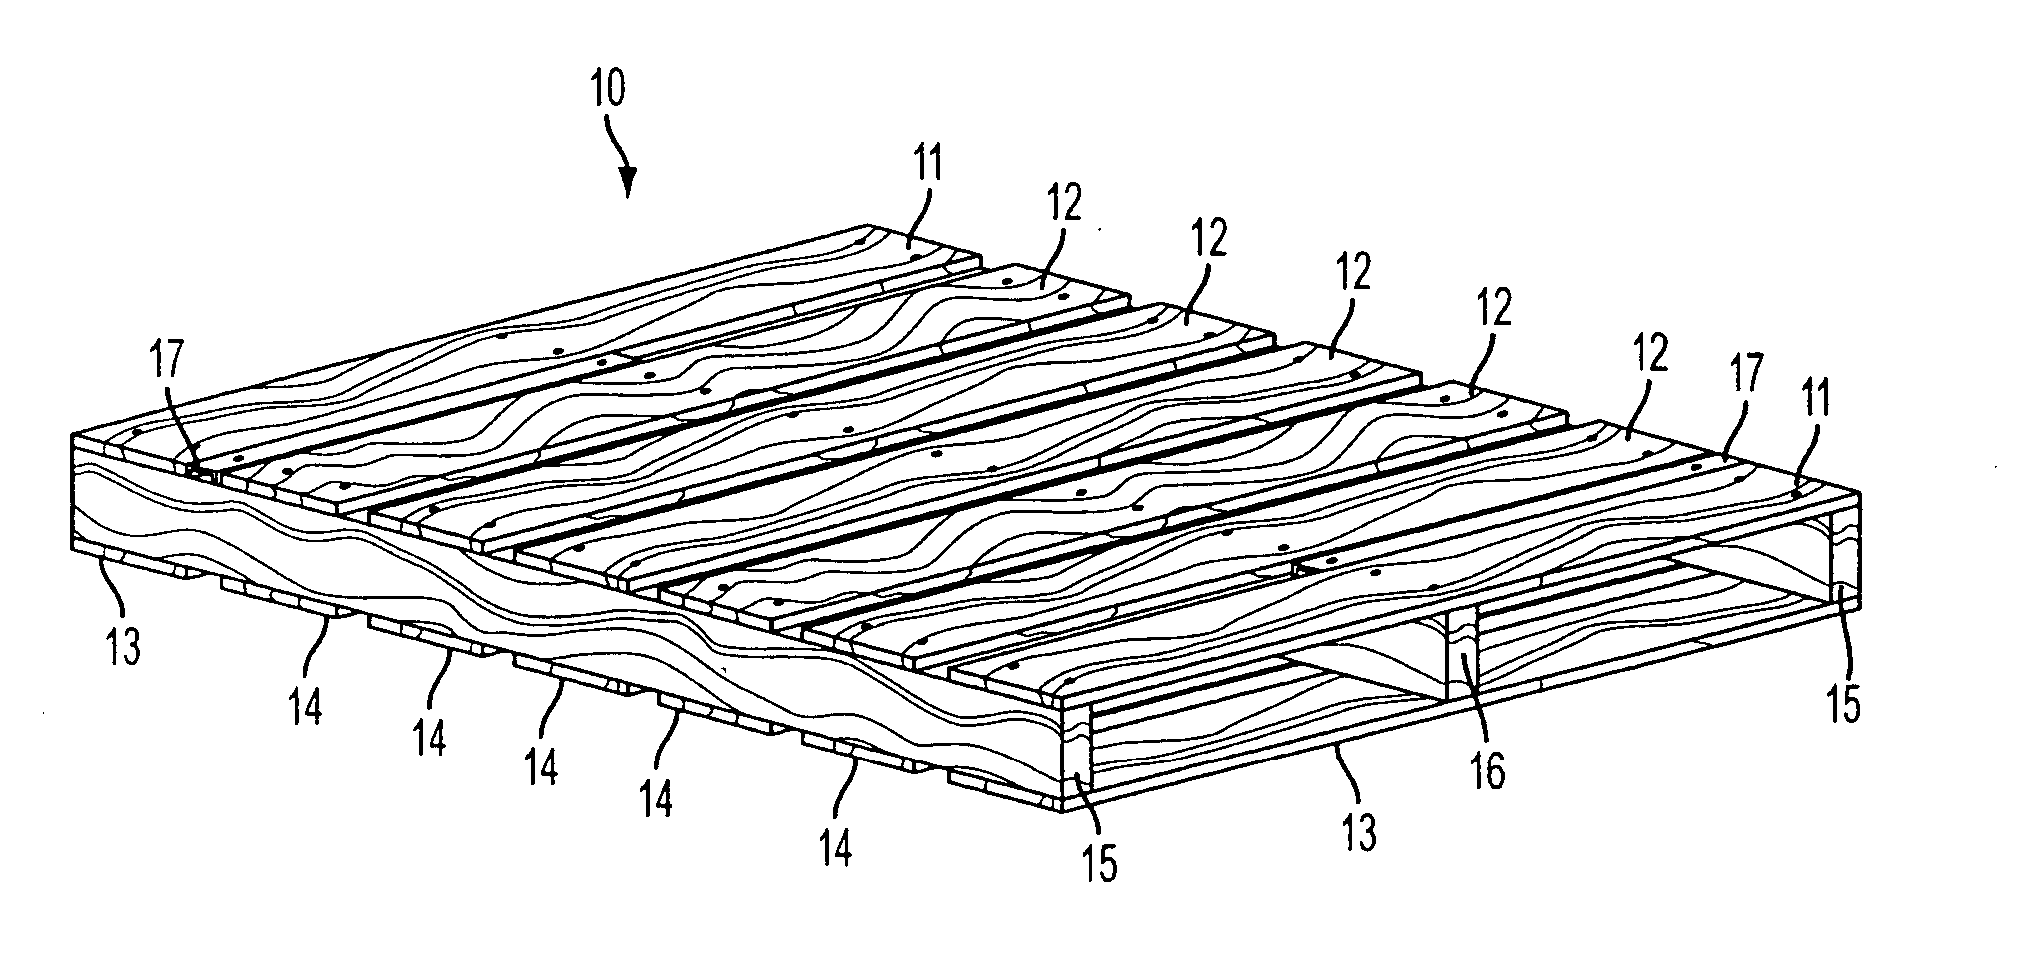 Shipping pallet equipped with a non-structural member carrying a readable device